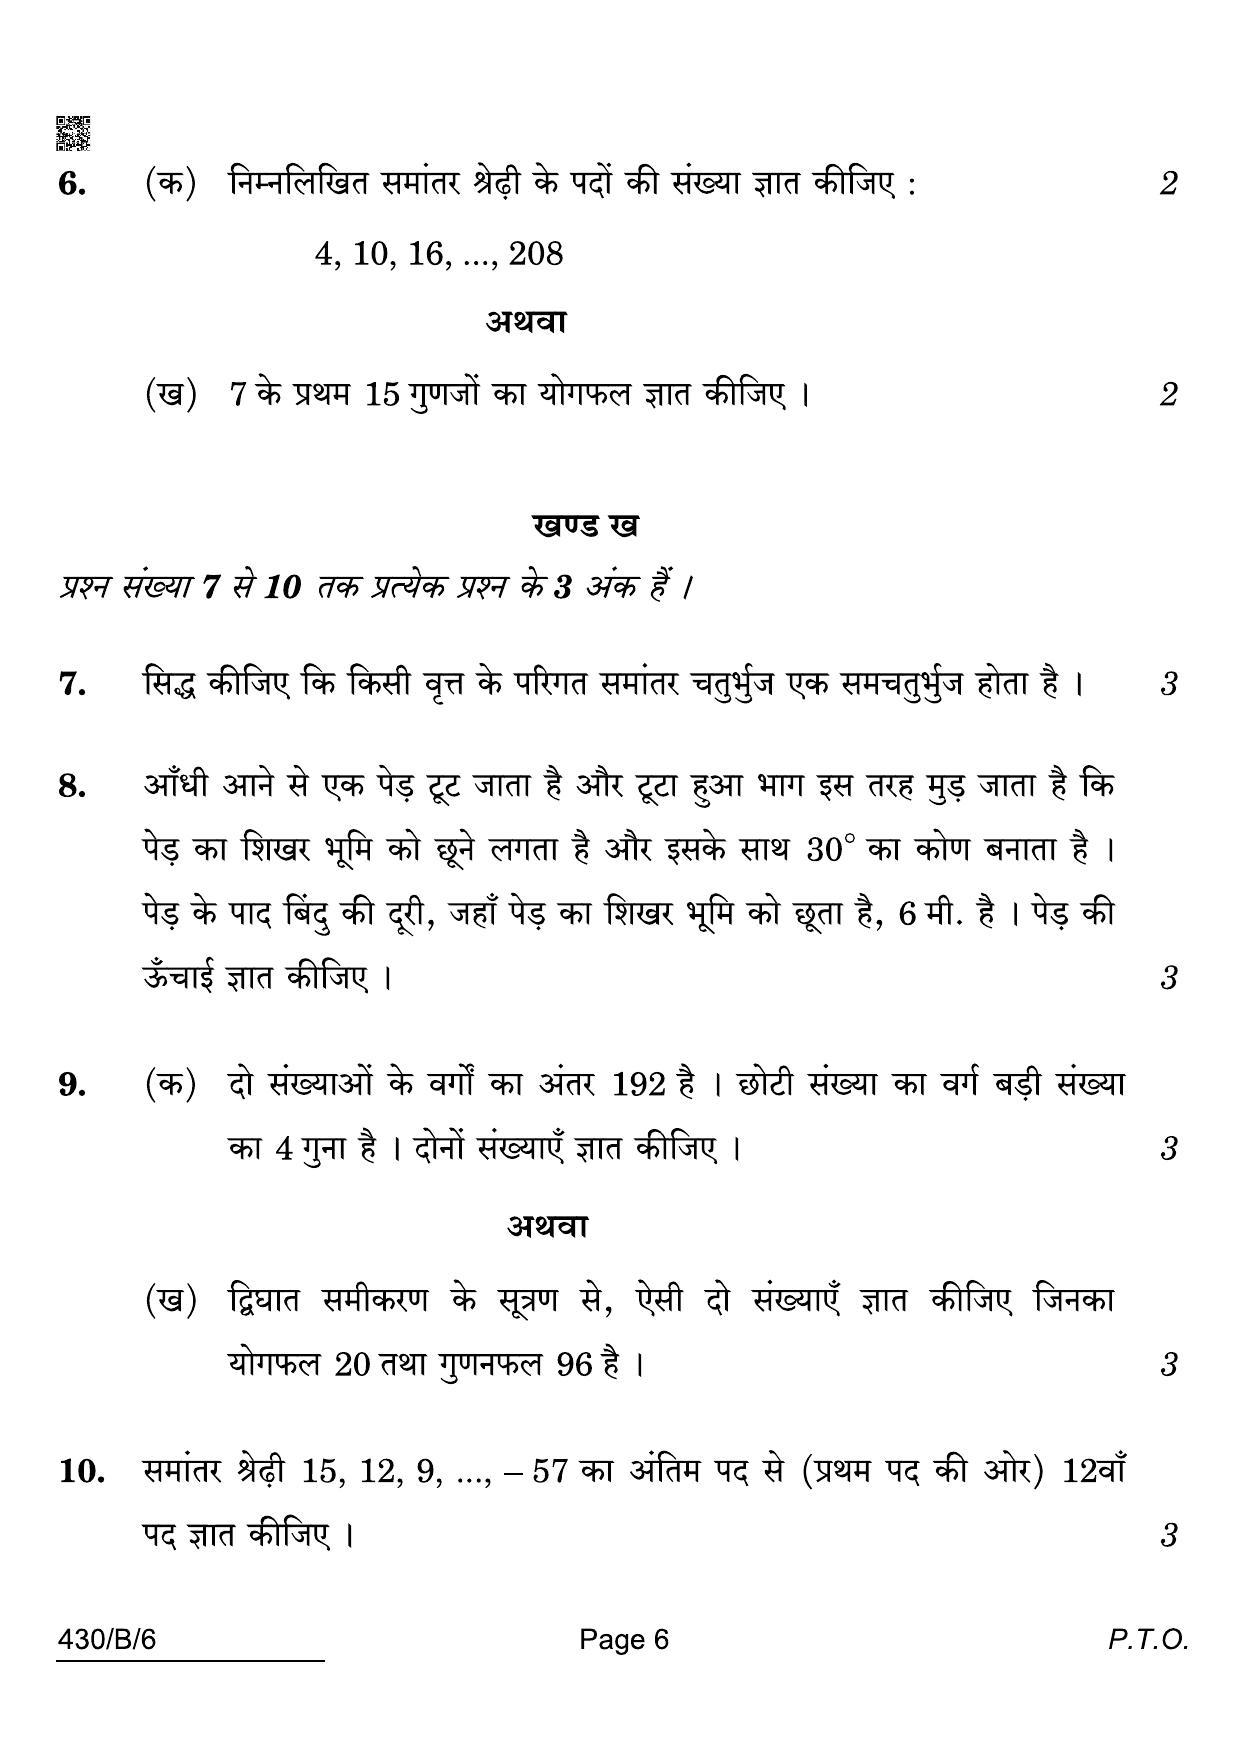 CBSE Class 10 430-B-6 Maths Basic Blind 2022 Compartment Question Paper - Page 6